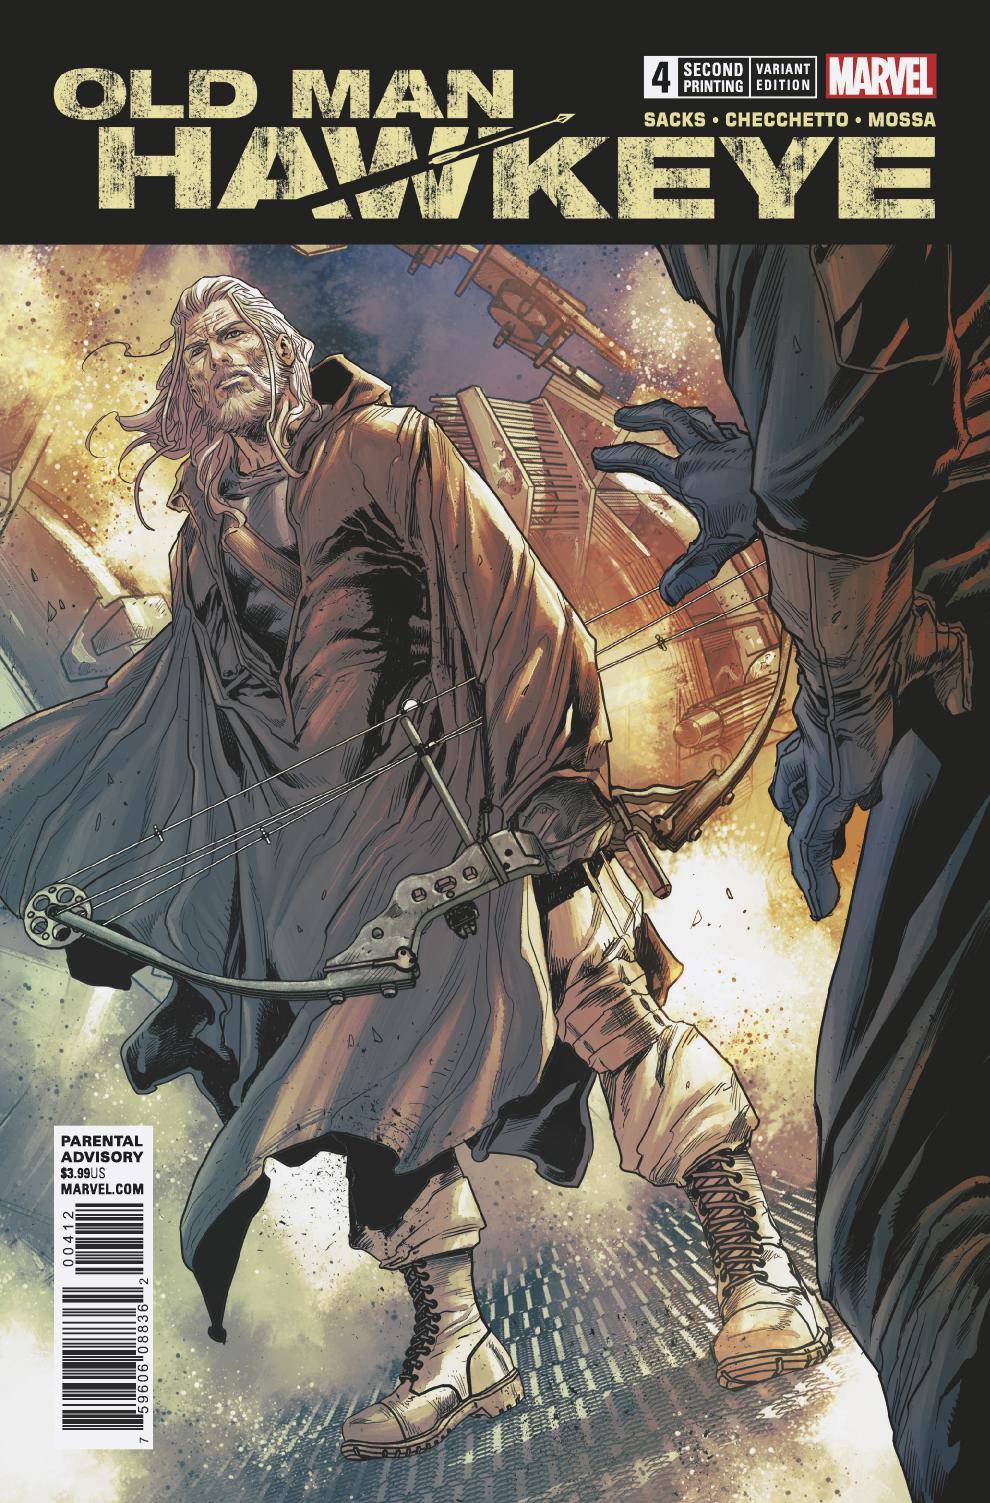 Old Man Hawkeye #4 (Of 12) 2nd Printing Checchetto Variant